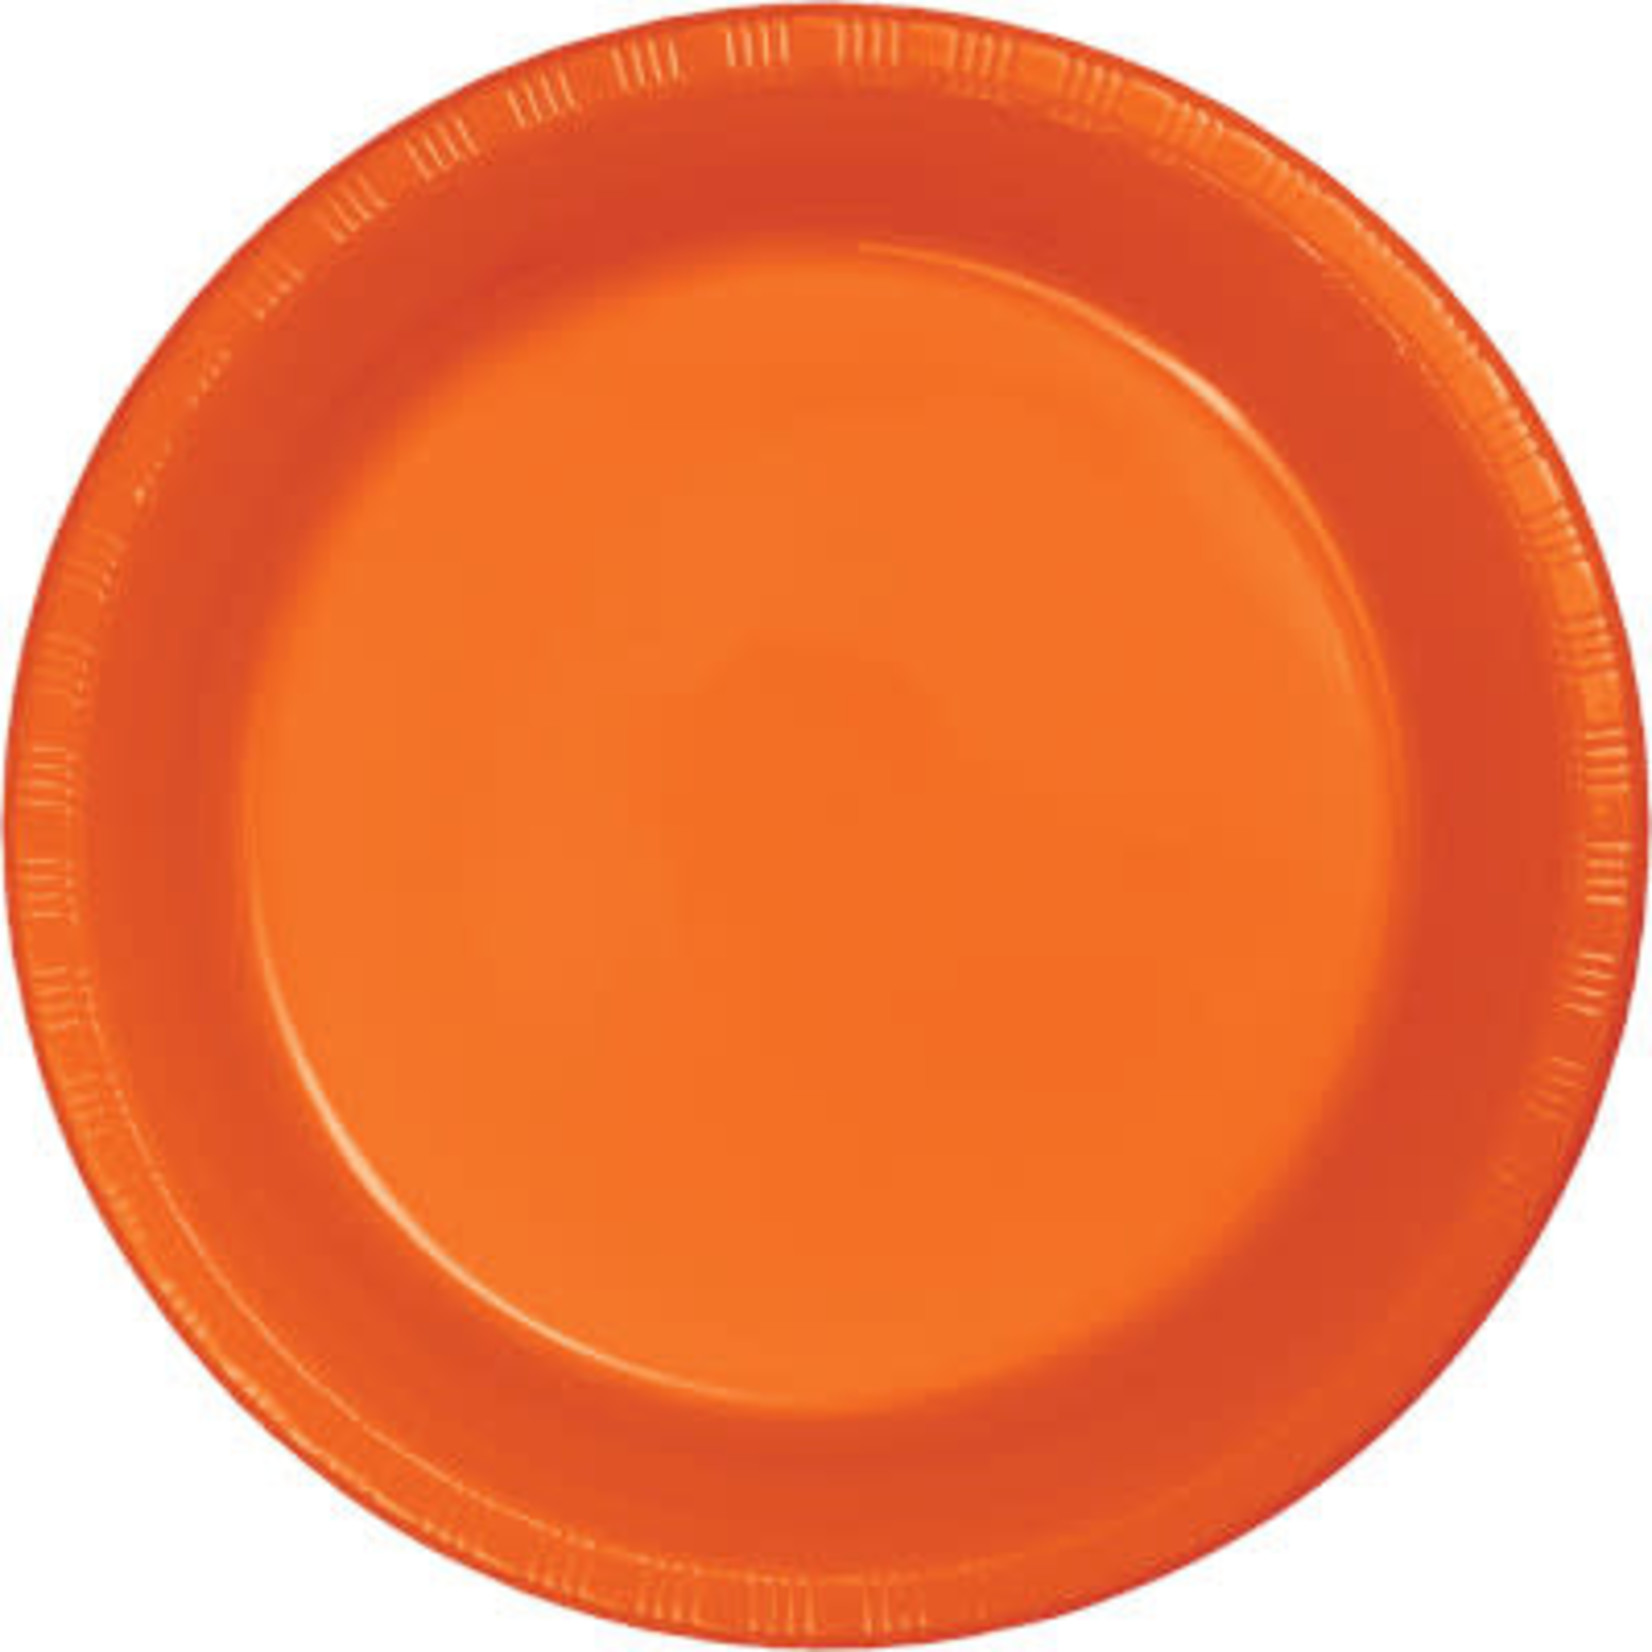 Touch of Color 7" Sunkissed Orange Plastic Plates - 20ct.